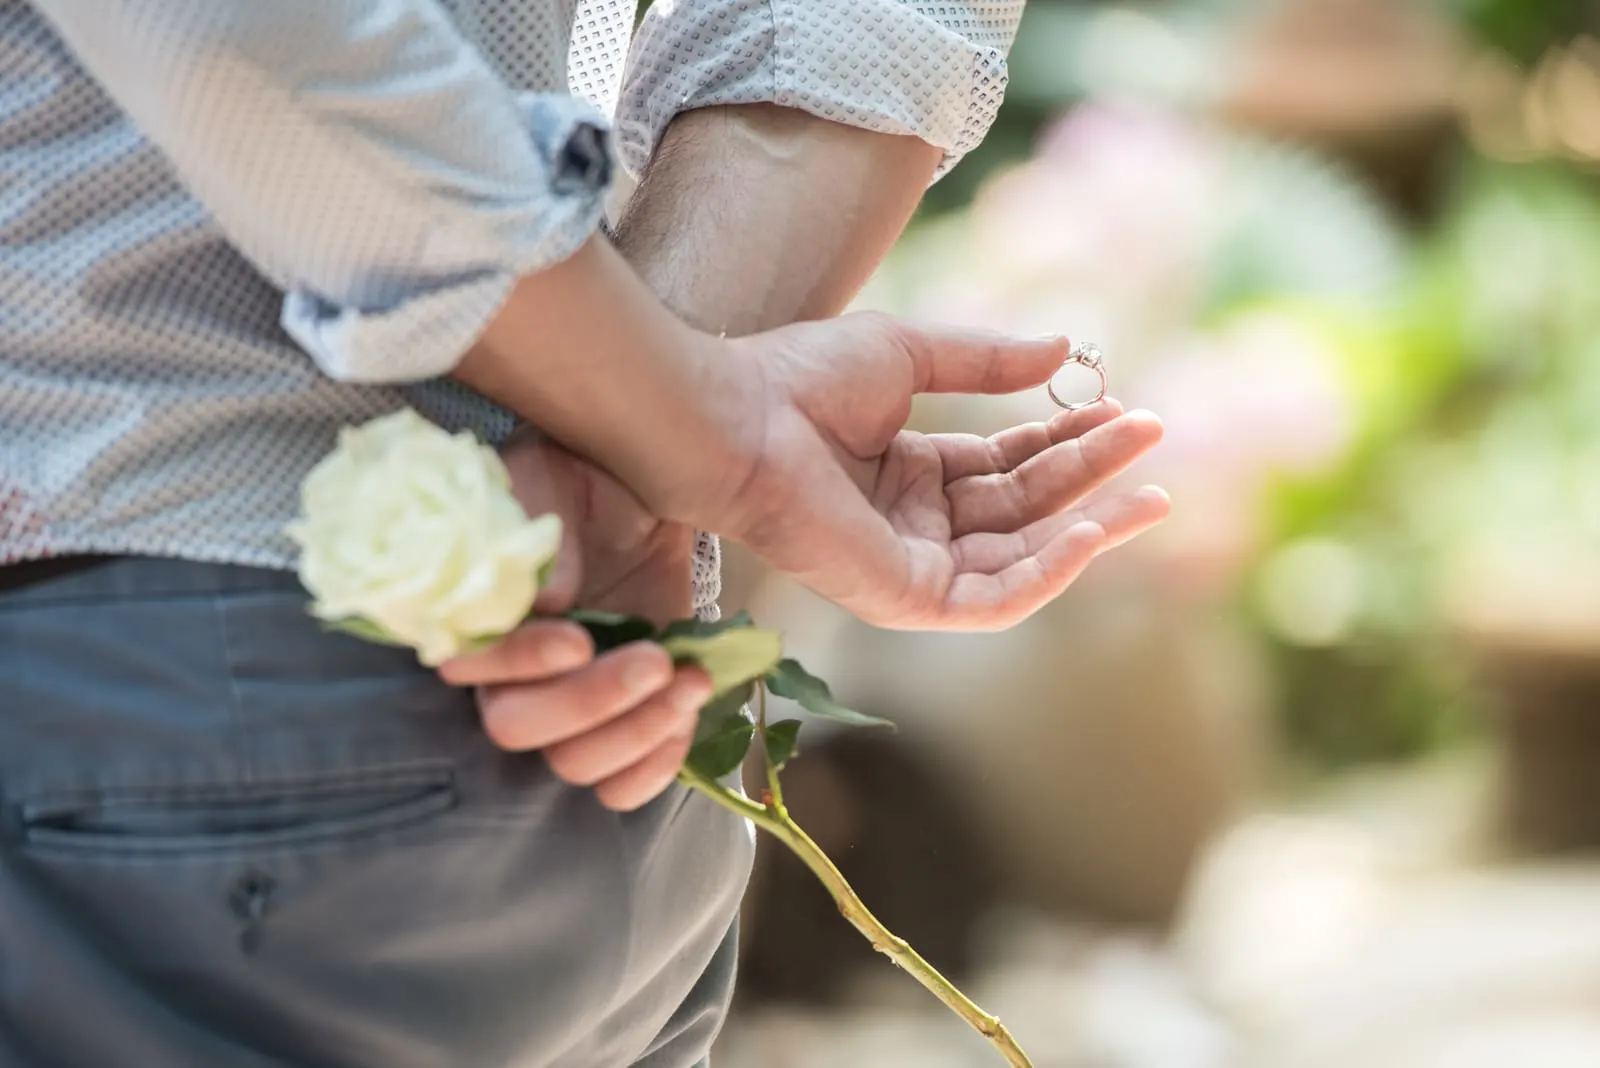 Men hide the ring and white rose behind with surprise